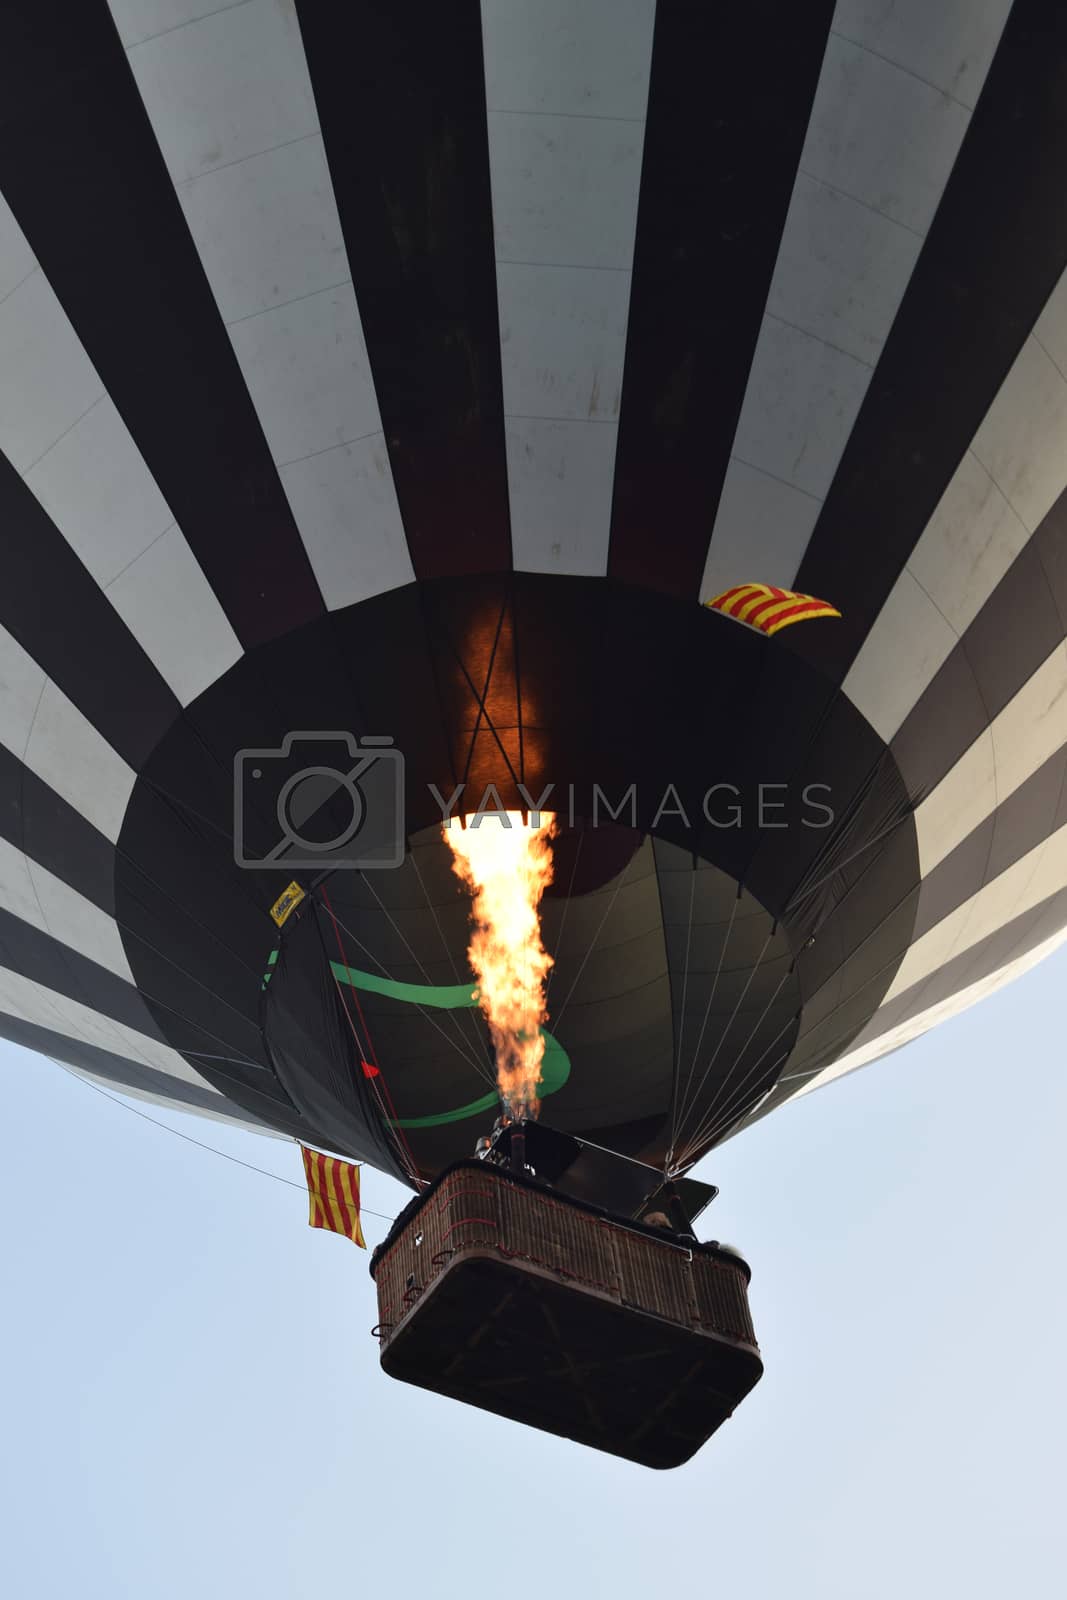 Royalty free image of Hot-air balloon taking off with fire flame by mynameg3rard